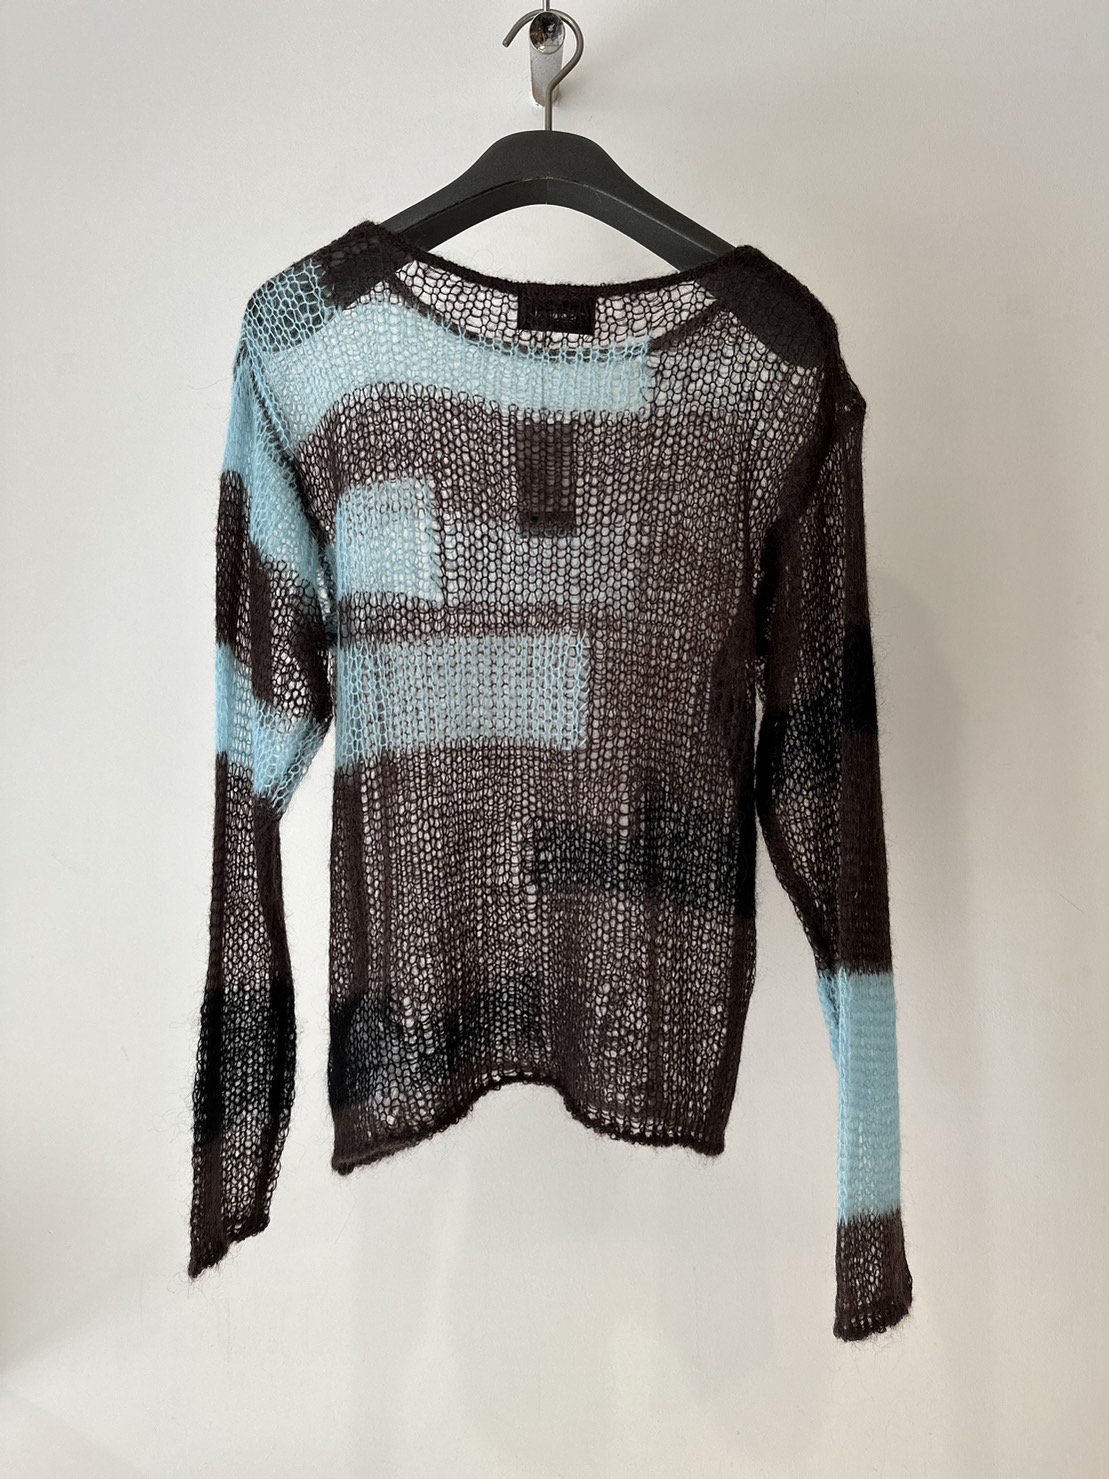 soduk<br />patchwork knit tops / brown<img class='new_mark_img2' src='https://img.shop-pro.jp/img/new/icons14.gif' style='border:none;display:inline;margin:0px;padding:0px;width:auto;' />